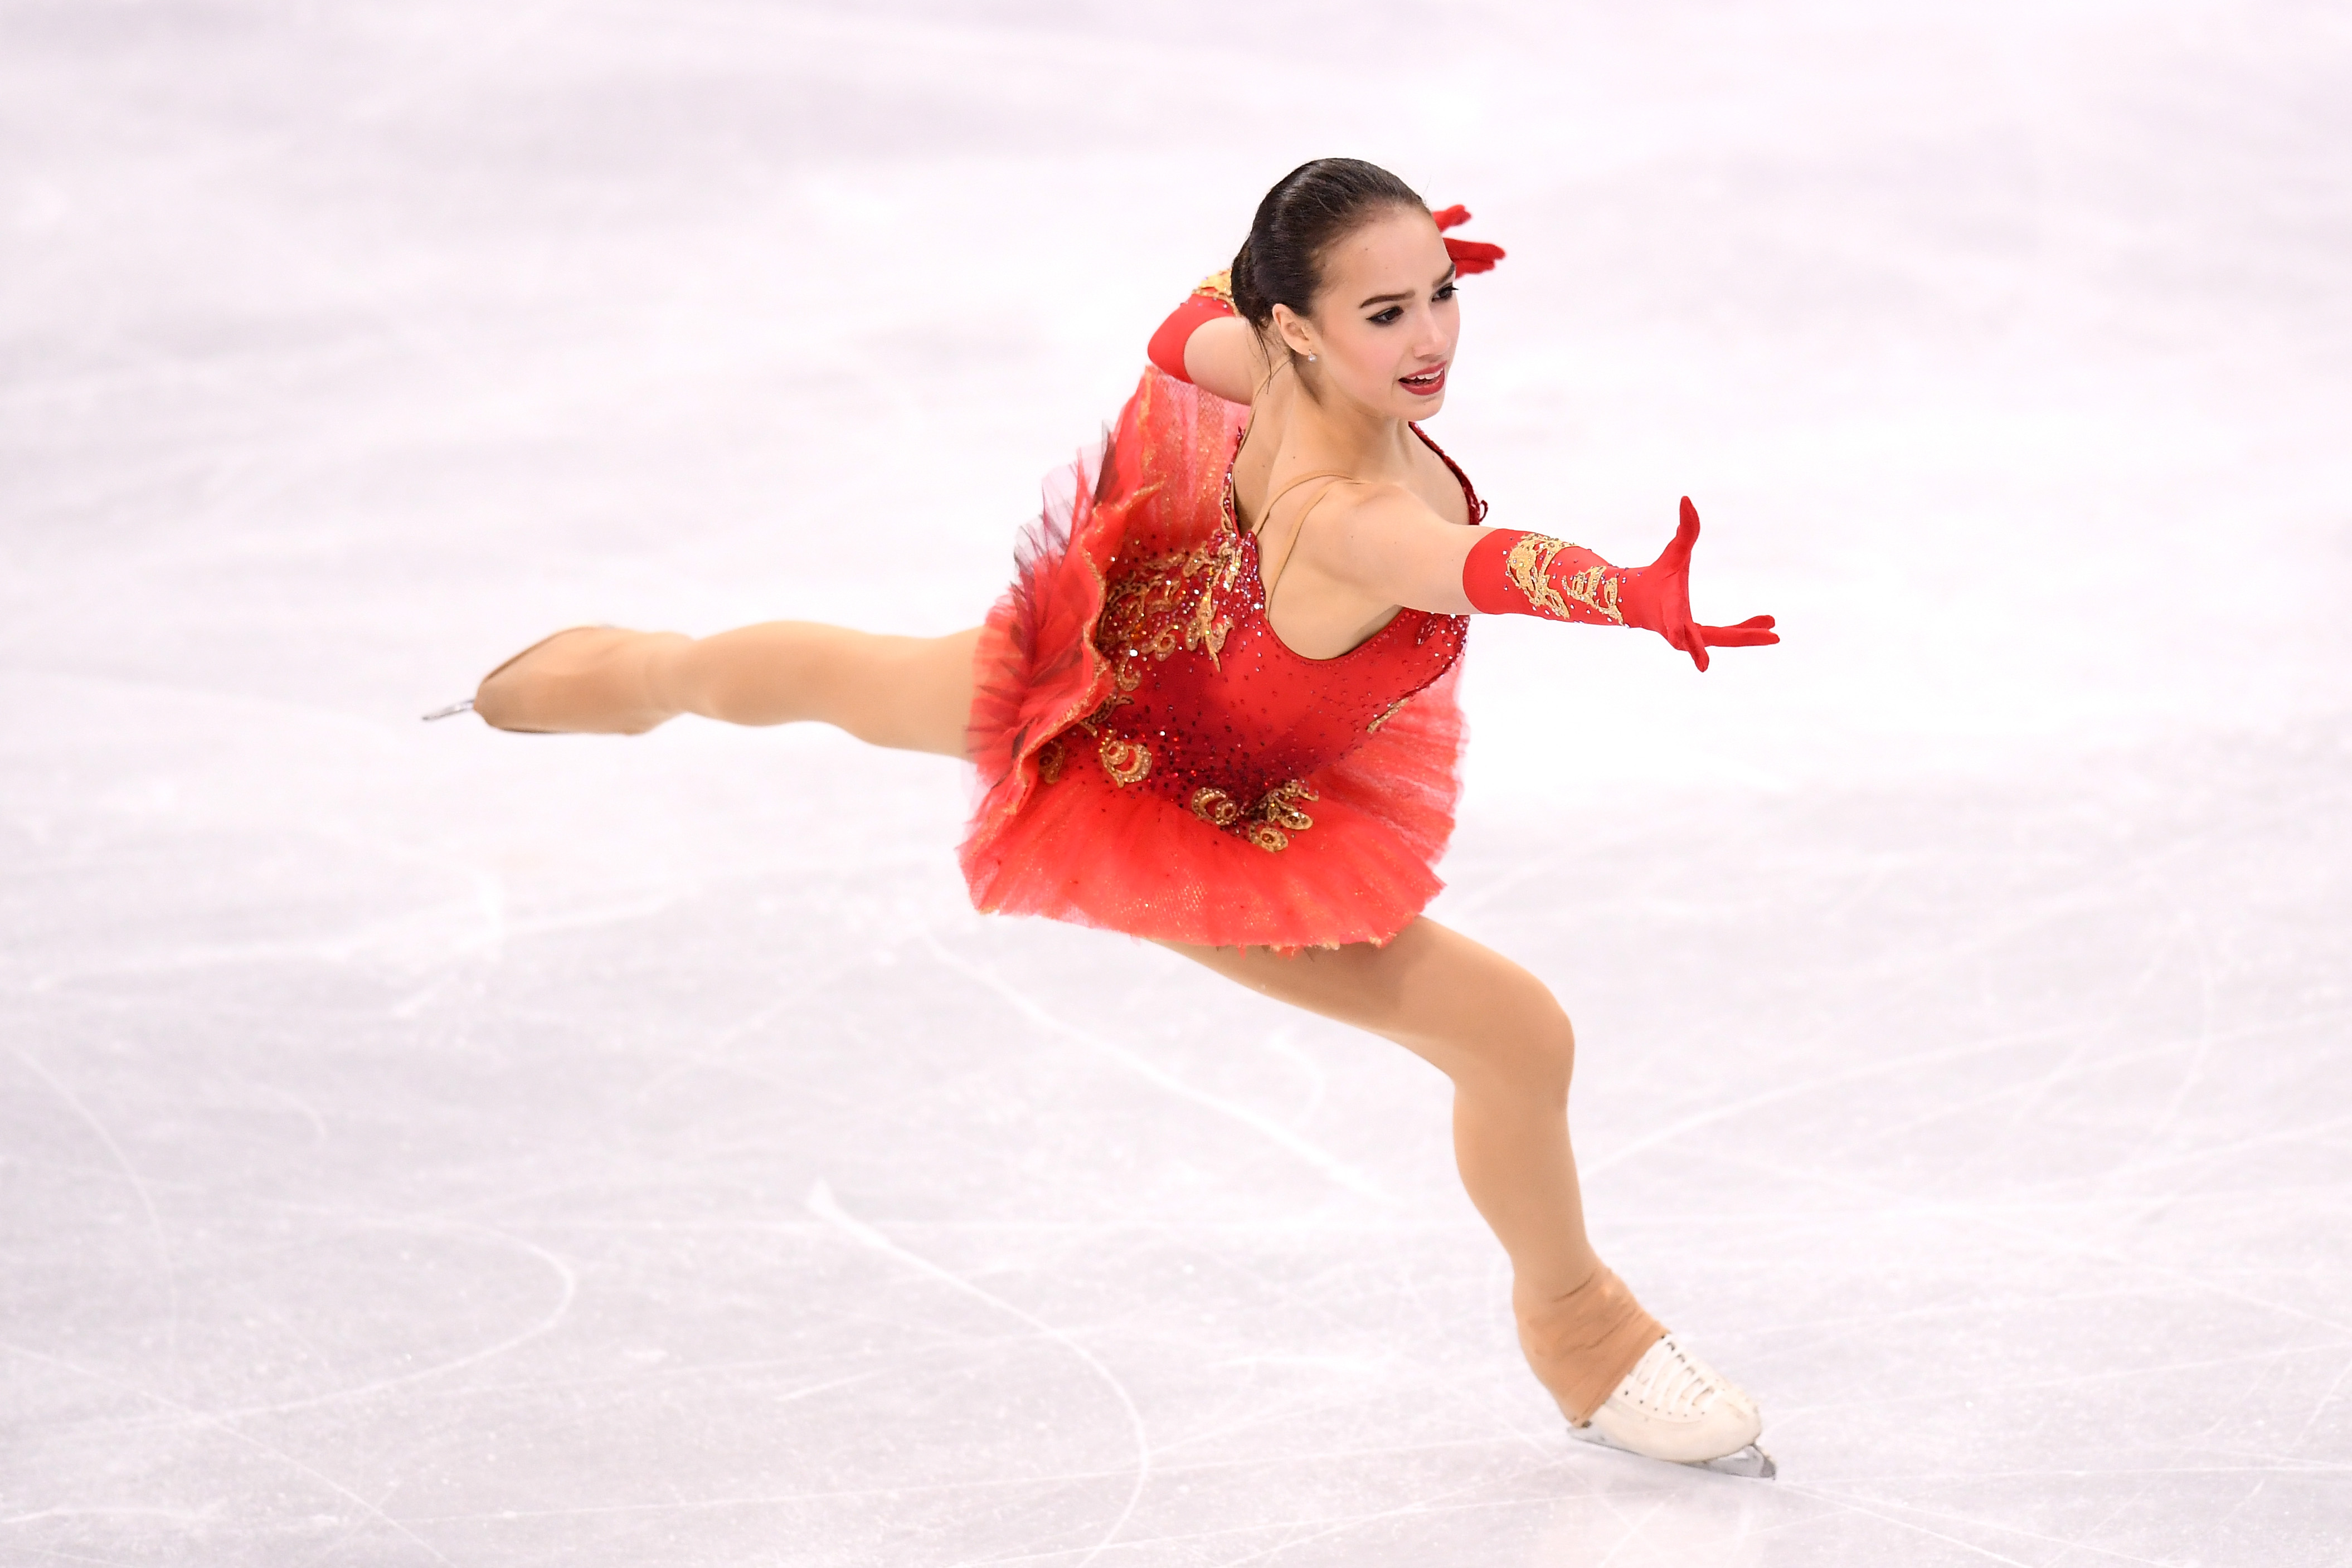 Alina Zagitova of Olympic Athlete from Russia competes during the Ladies Single Skating Free Skating on day fourteen of the PyeongChang 2018 Winter Olympic Games at Gangneung Ice Arena on February 23, 2018 in Gangneung, South Korea. (Harry How—Getty Images)